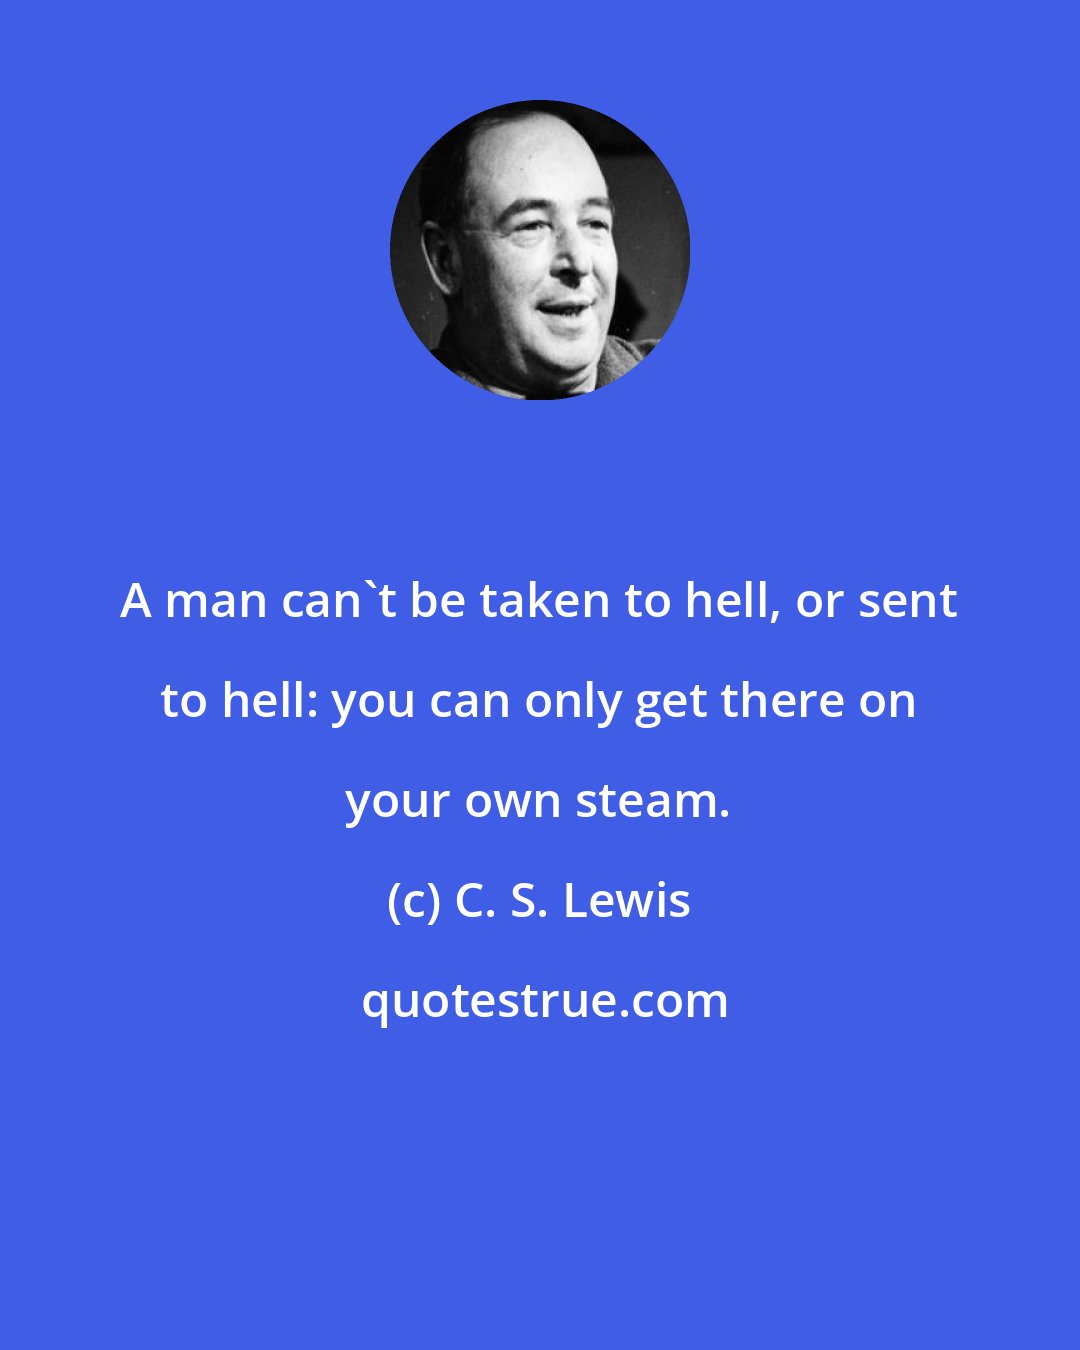 C. S. Lewis: A man can't be taken to hell, or sent to hell: you can only get there on your own steam.